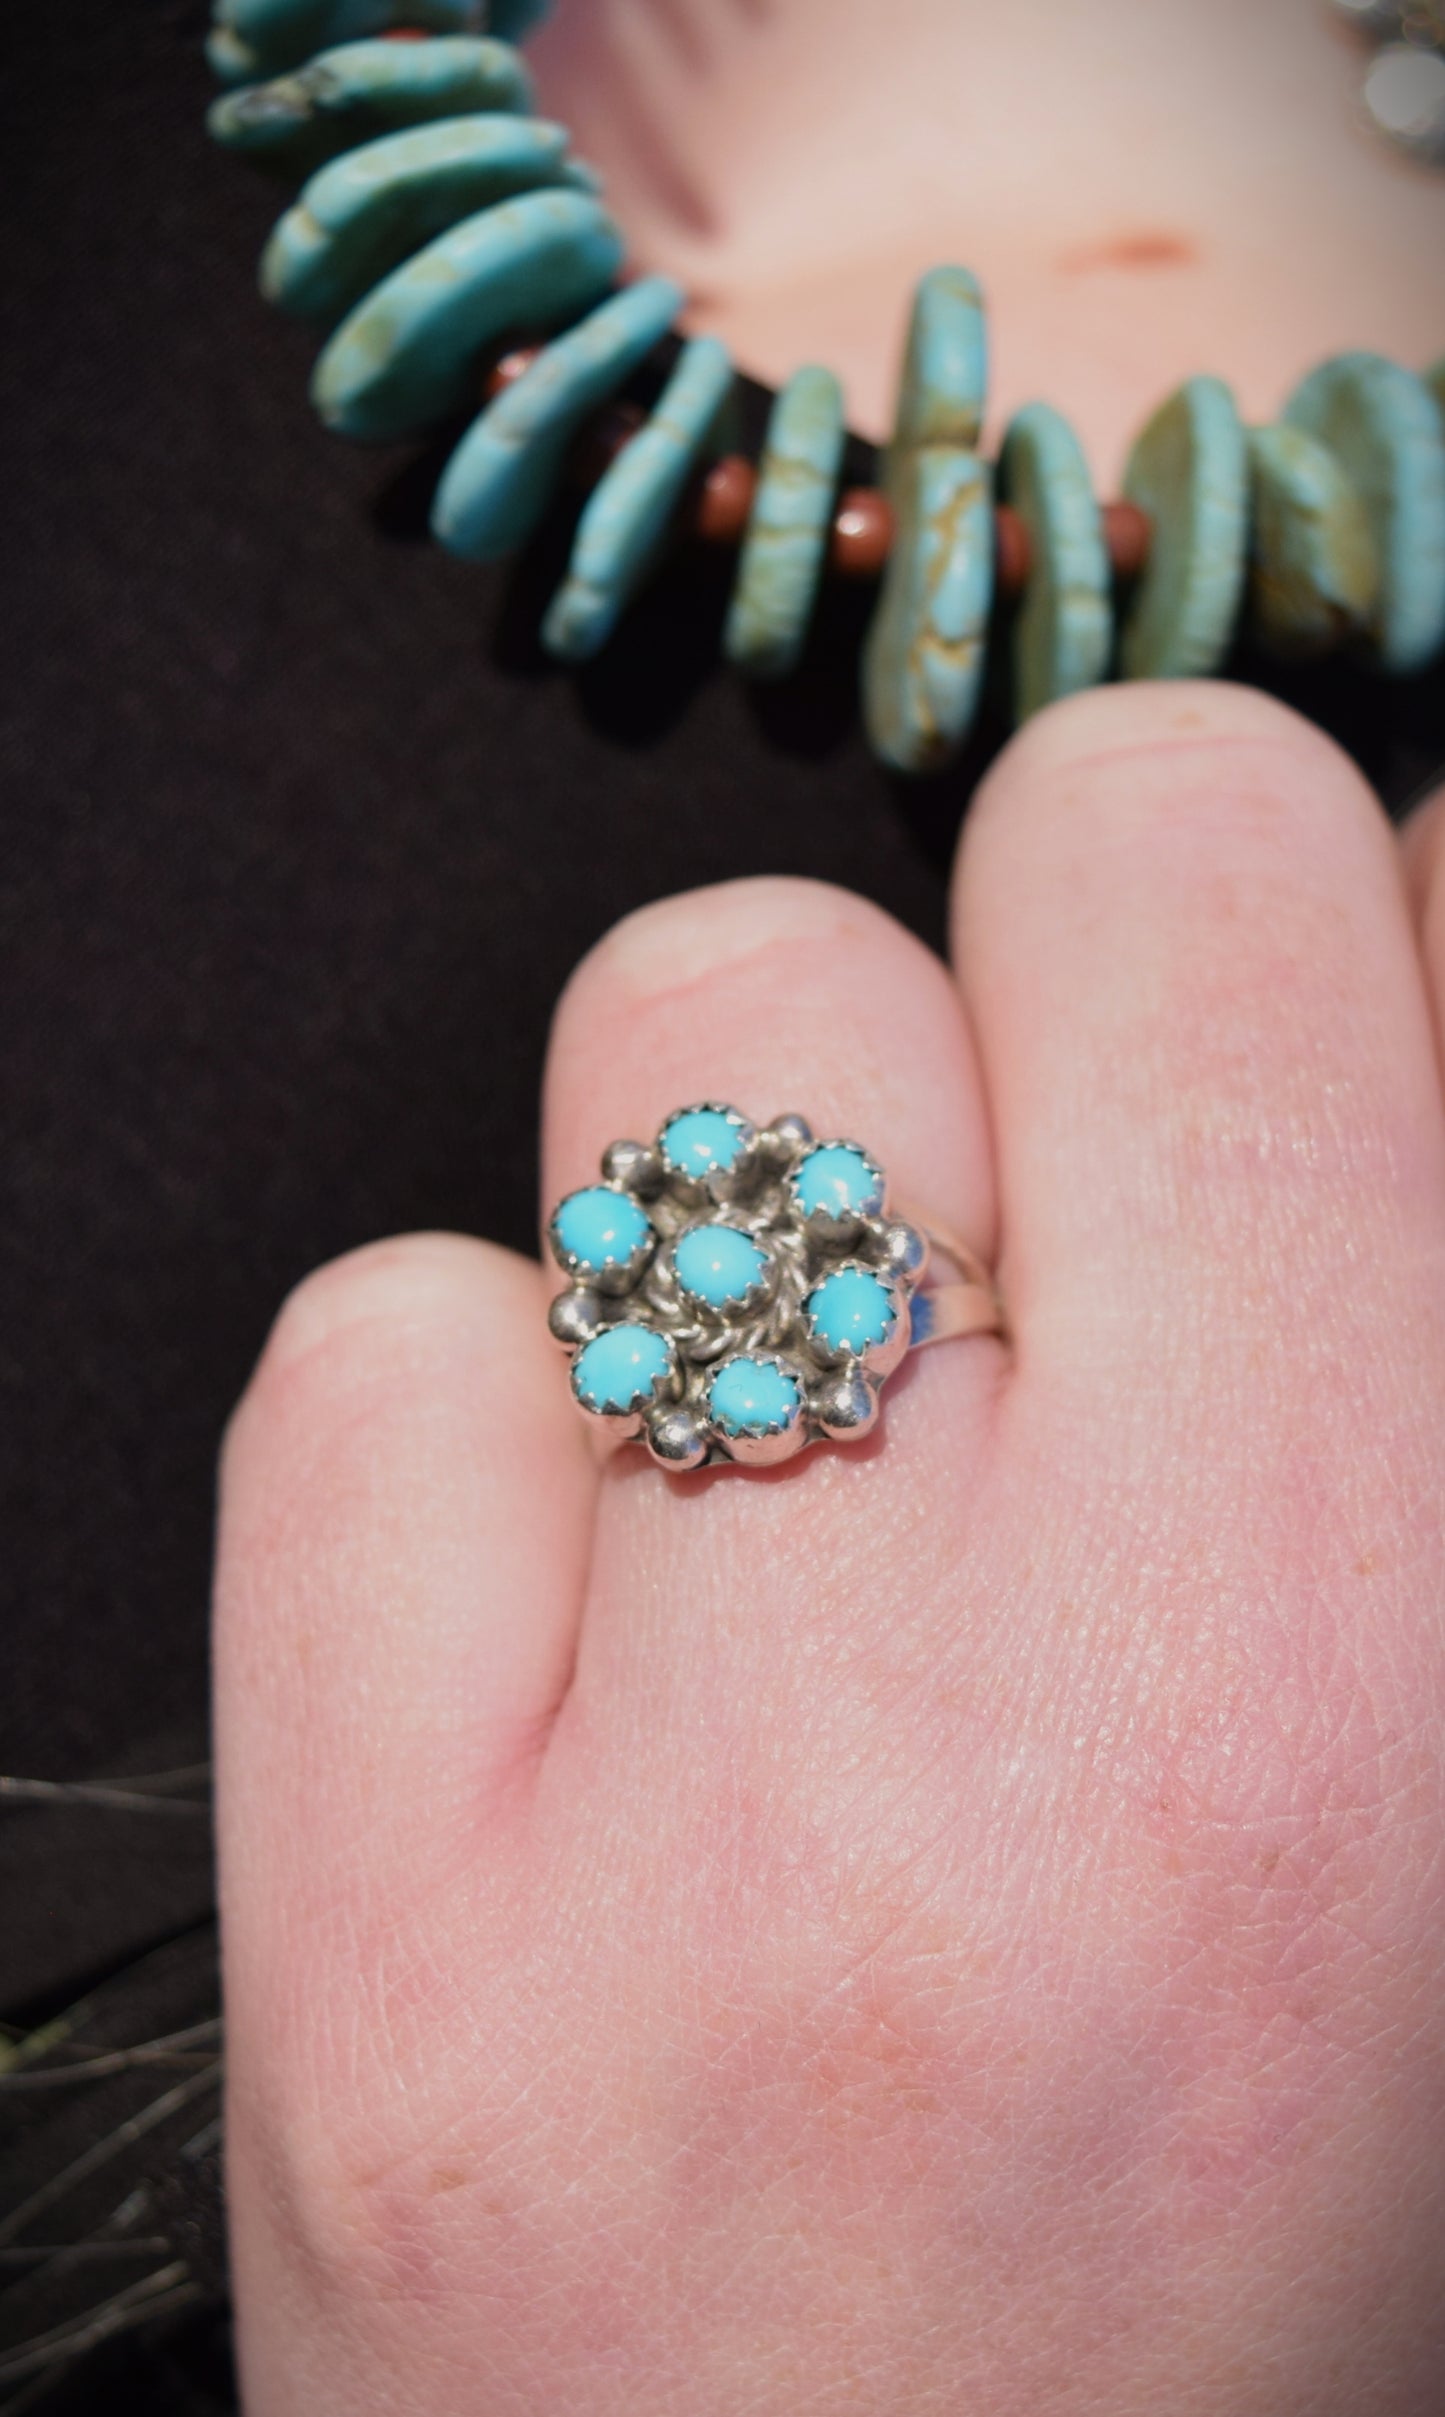 The Periwinkle Turquoise Ring